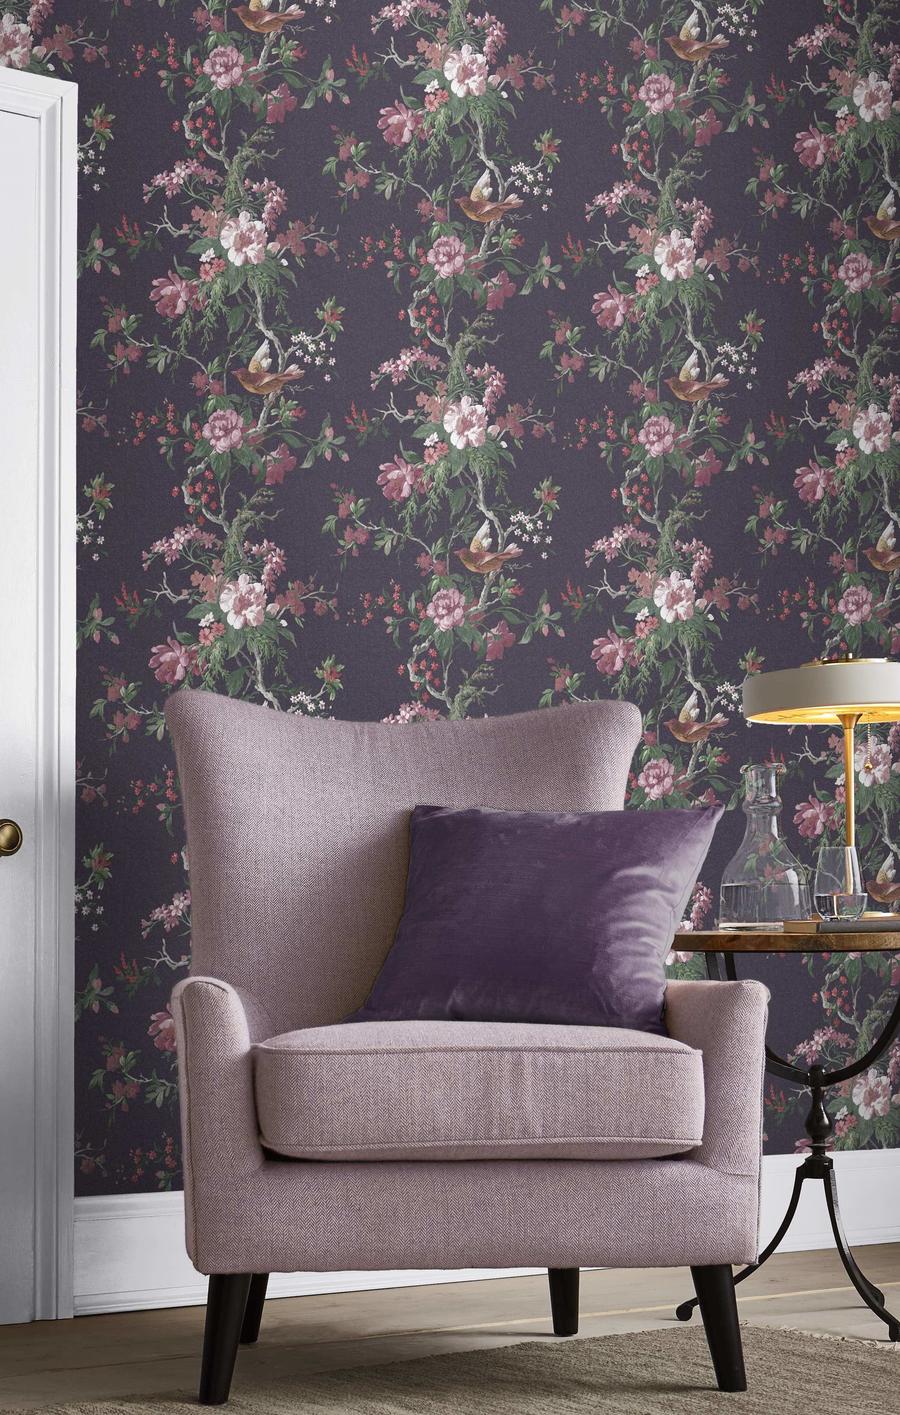 Six of the season’s most fetching floral wallcoverings